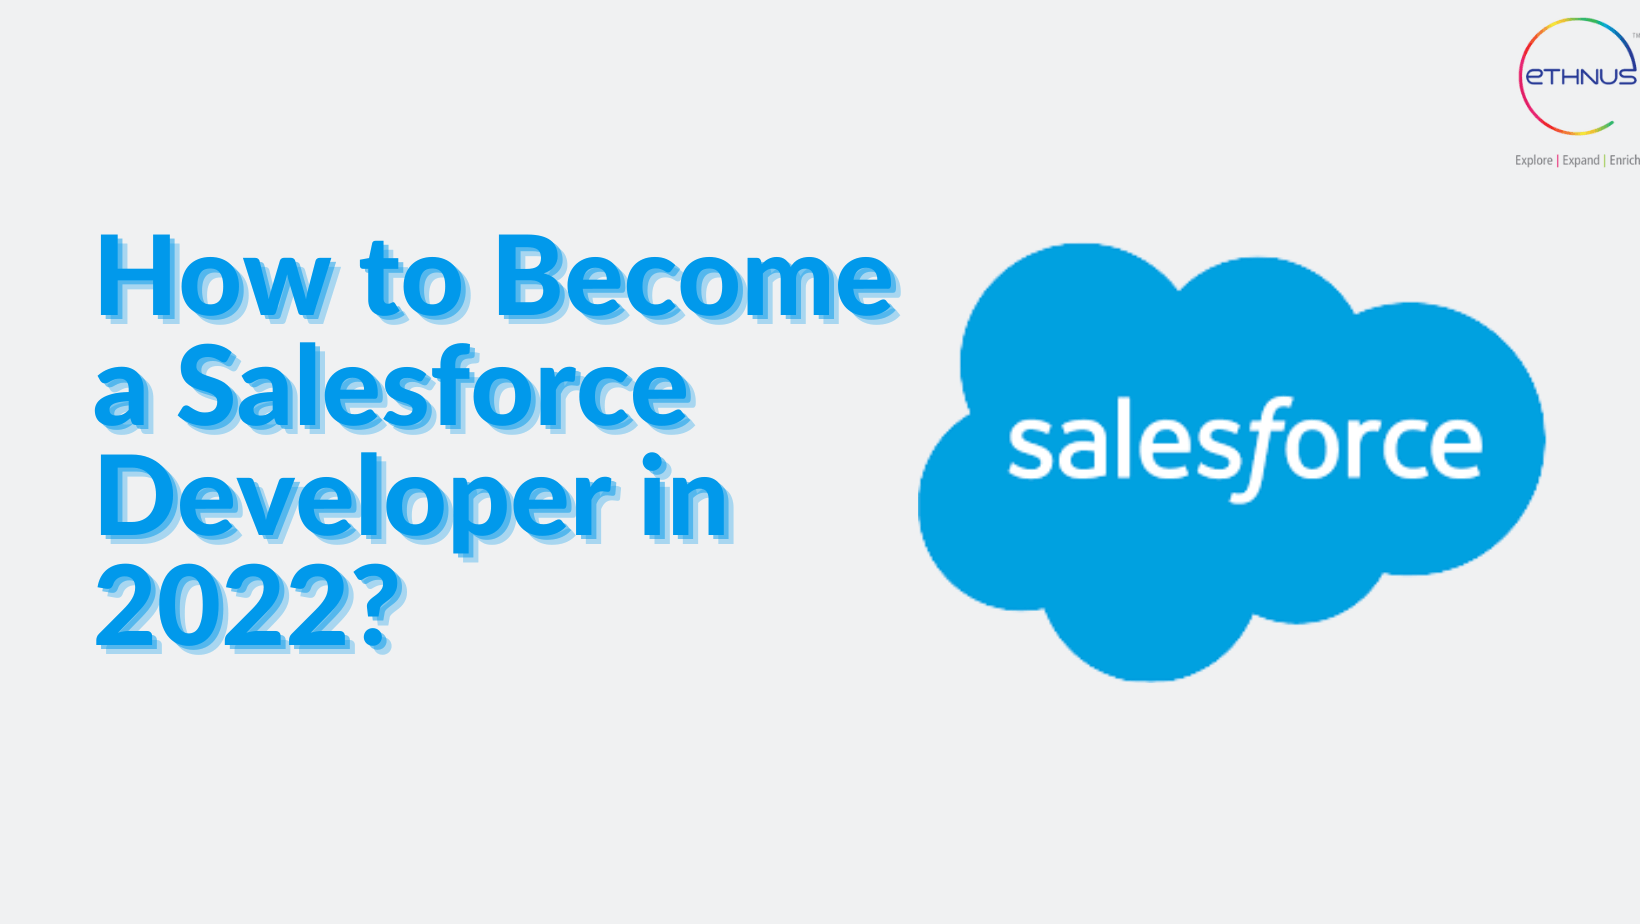 How to become a Salesforce Developer (1)